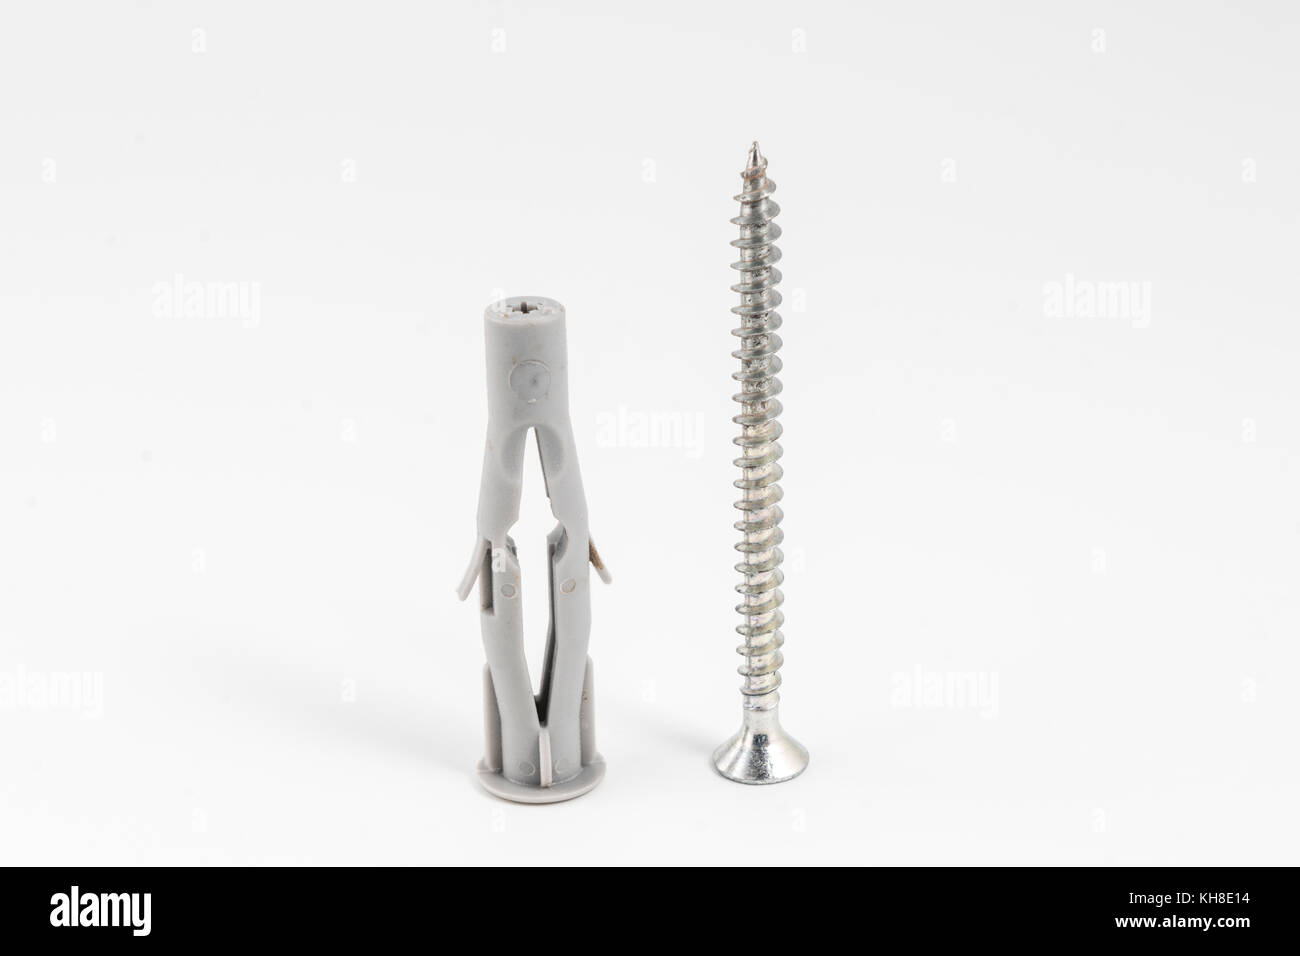 A screw and a plastic plug on a white background Stock Photo